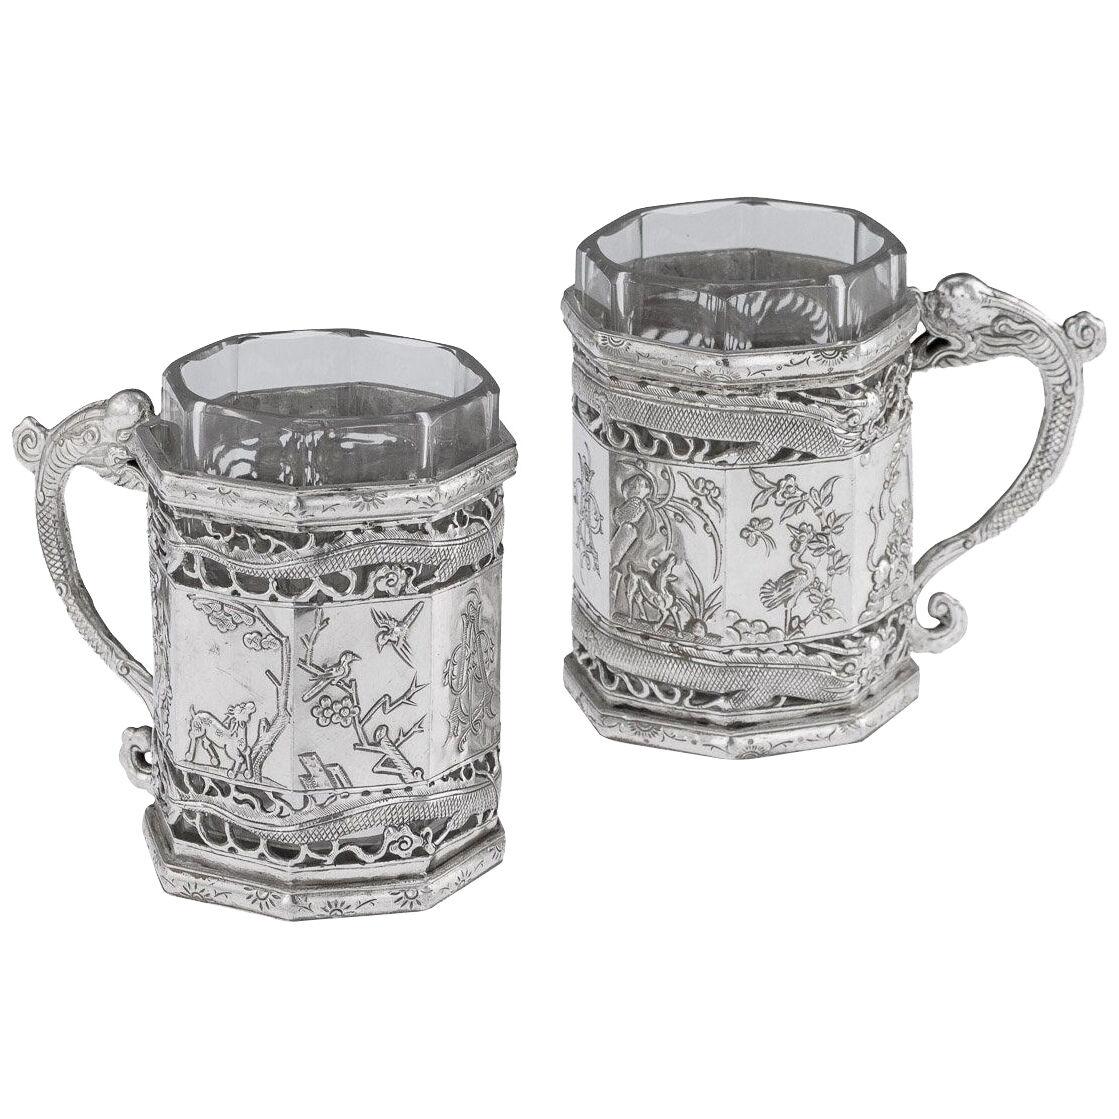 19thC Chinese Export Solid Silver Tea Glass Holders, Shanghai c.1880